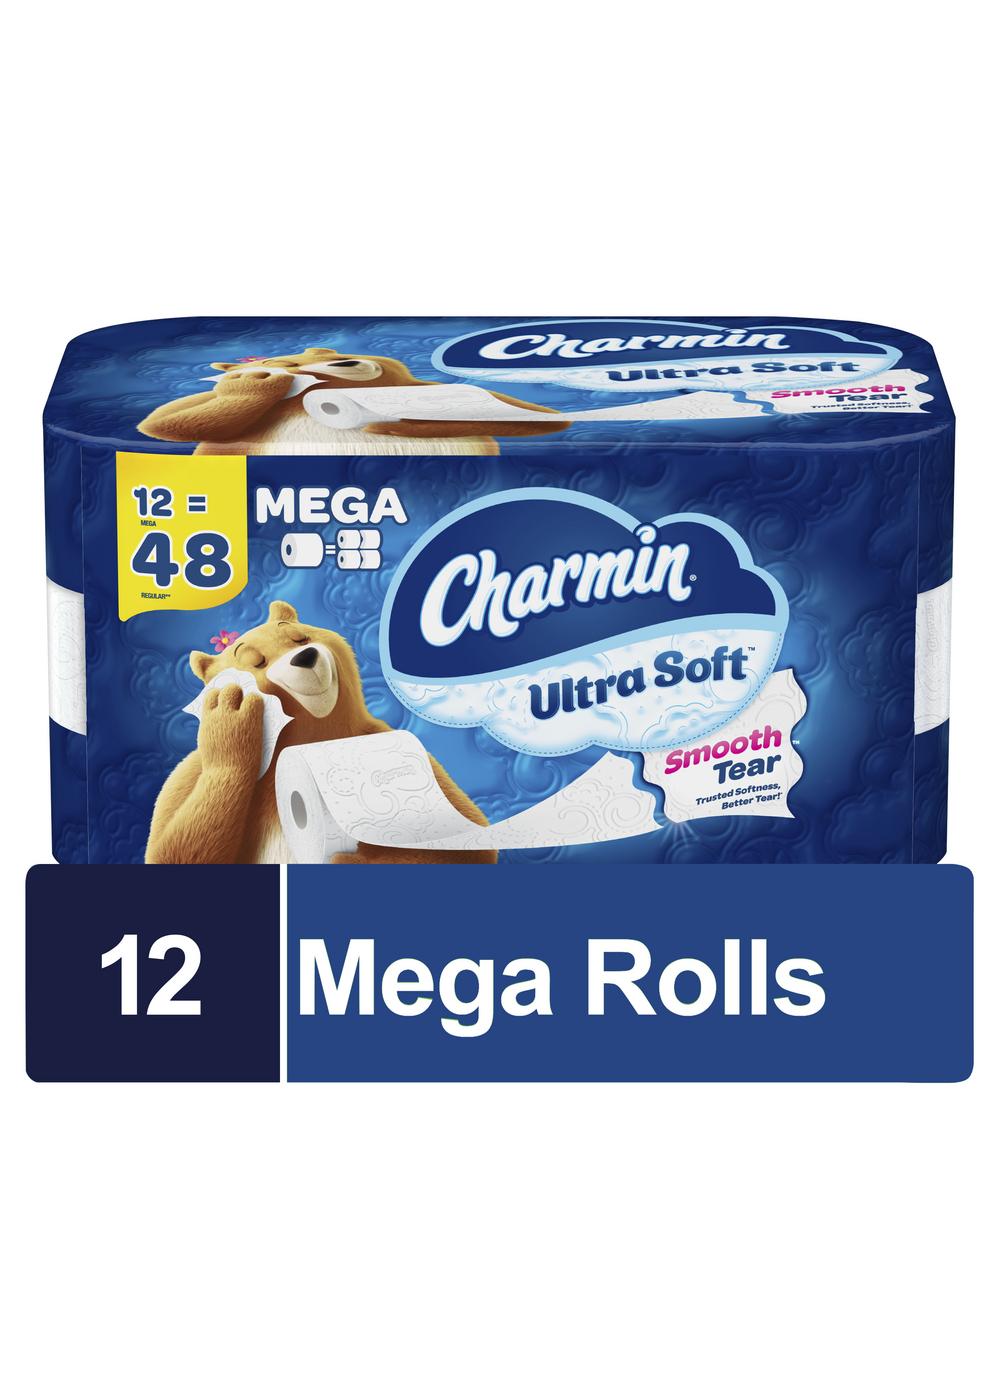 Charmin Ultra Soft Toilet Paper; image 4 of 20